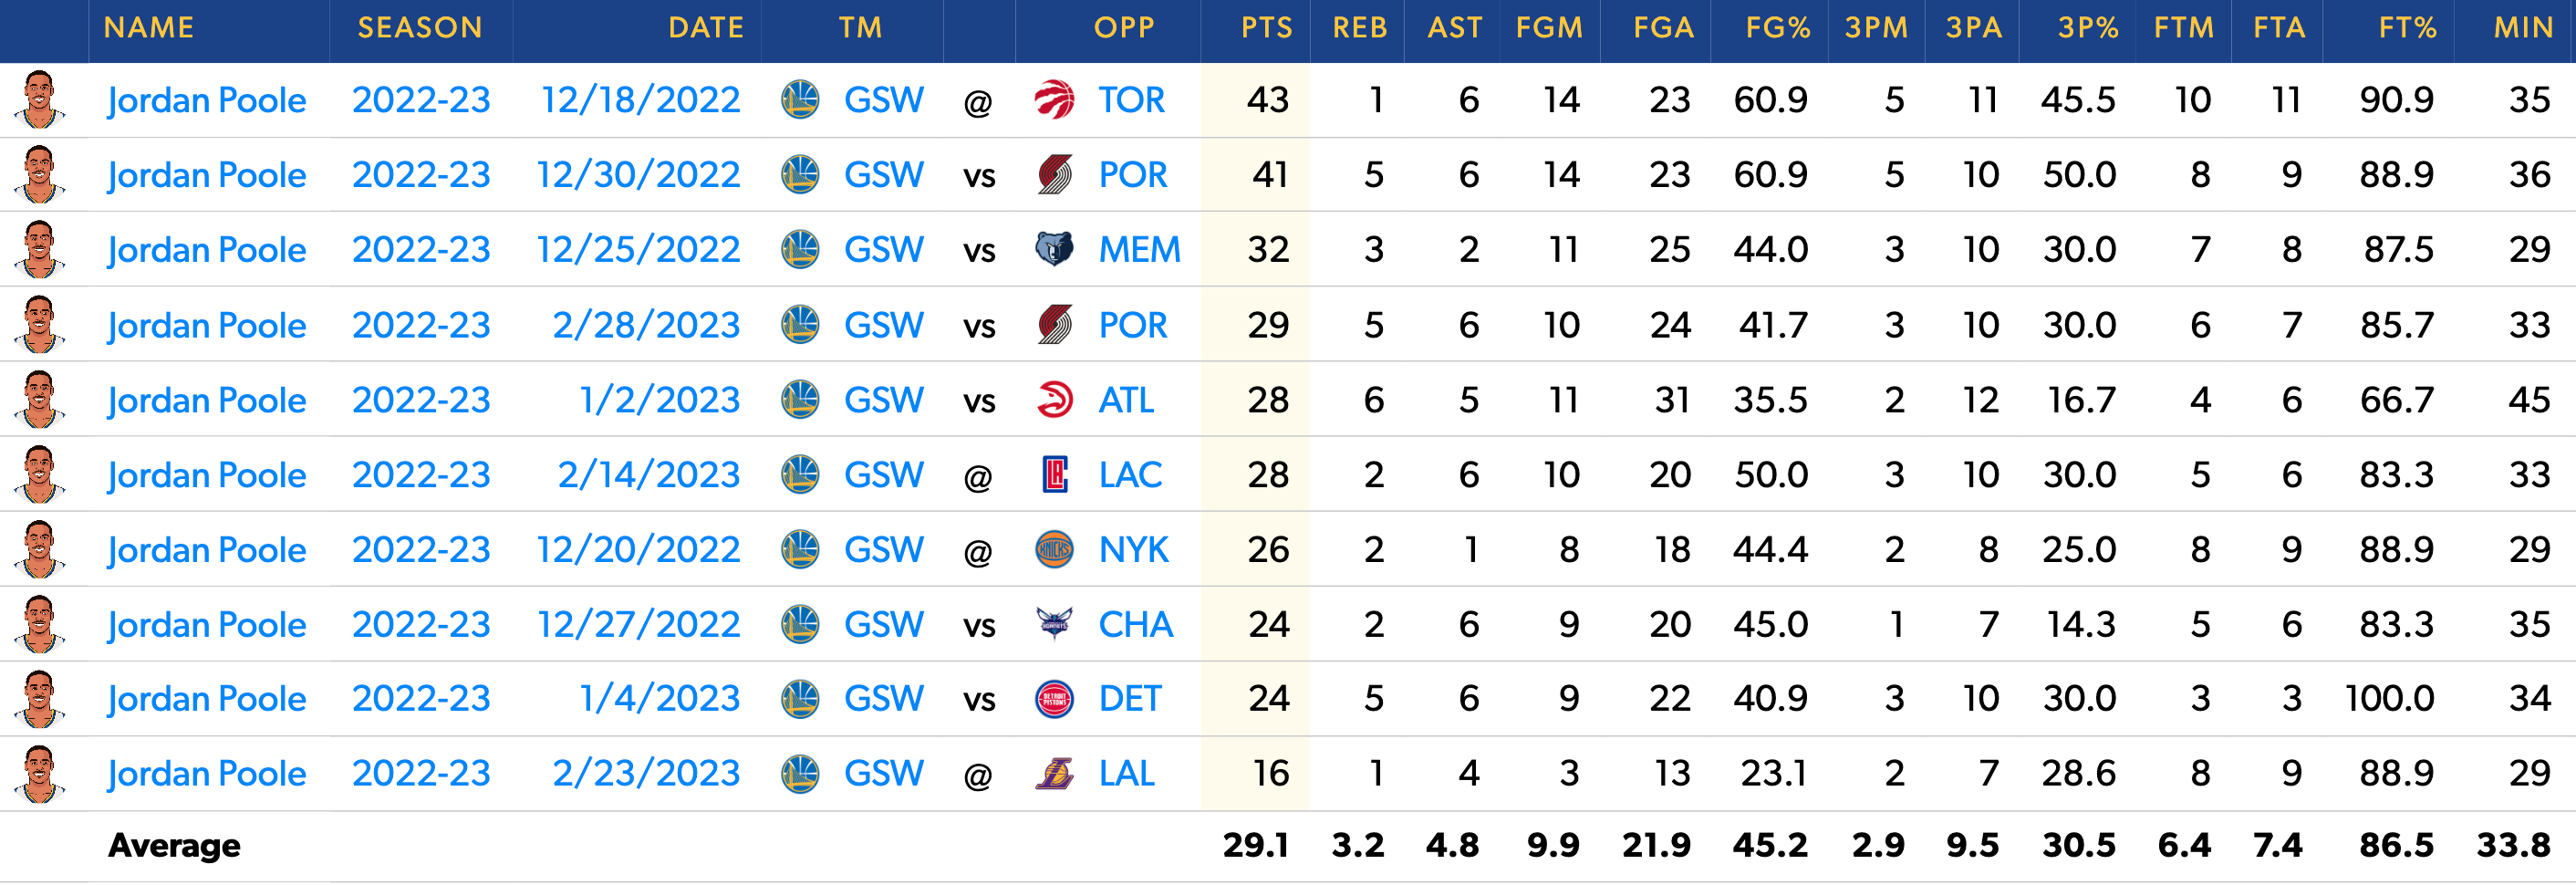 Poole's games without Curry + Wiggins, and with Klay + Draymond this season.